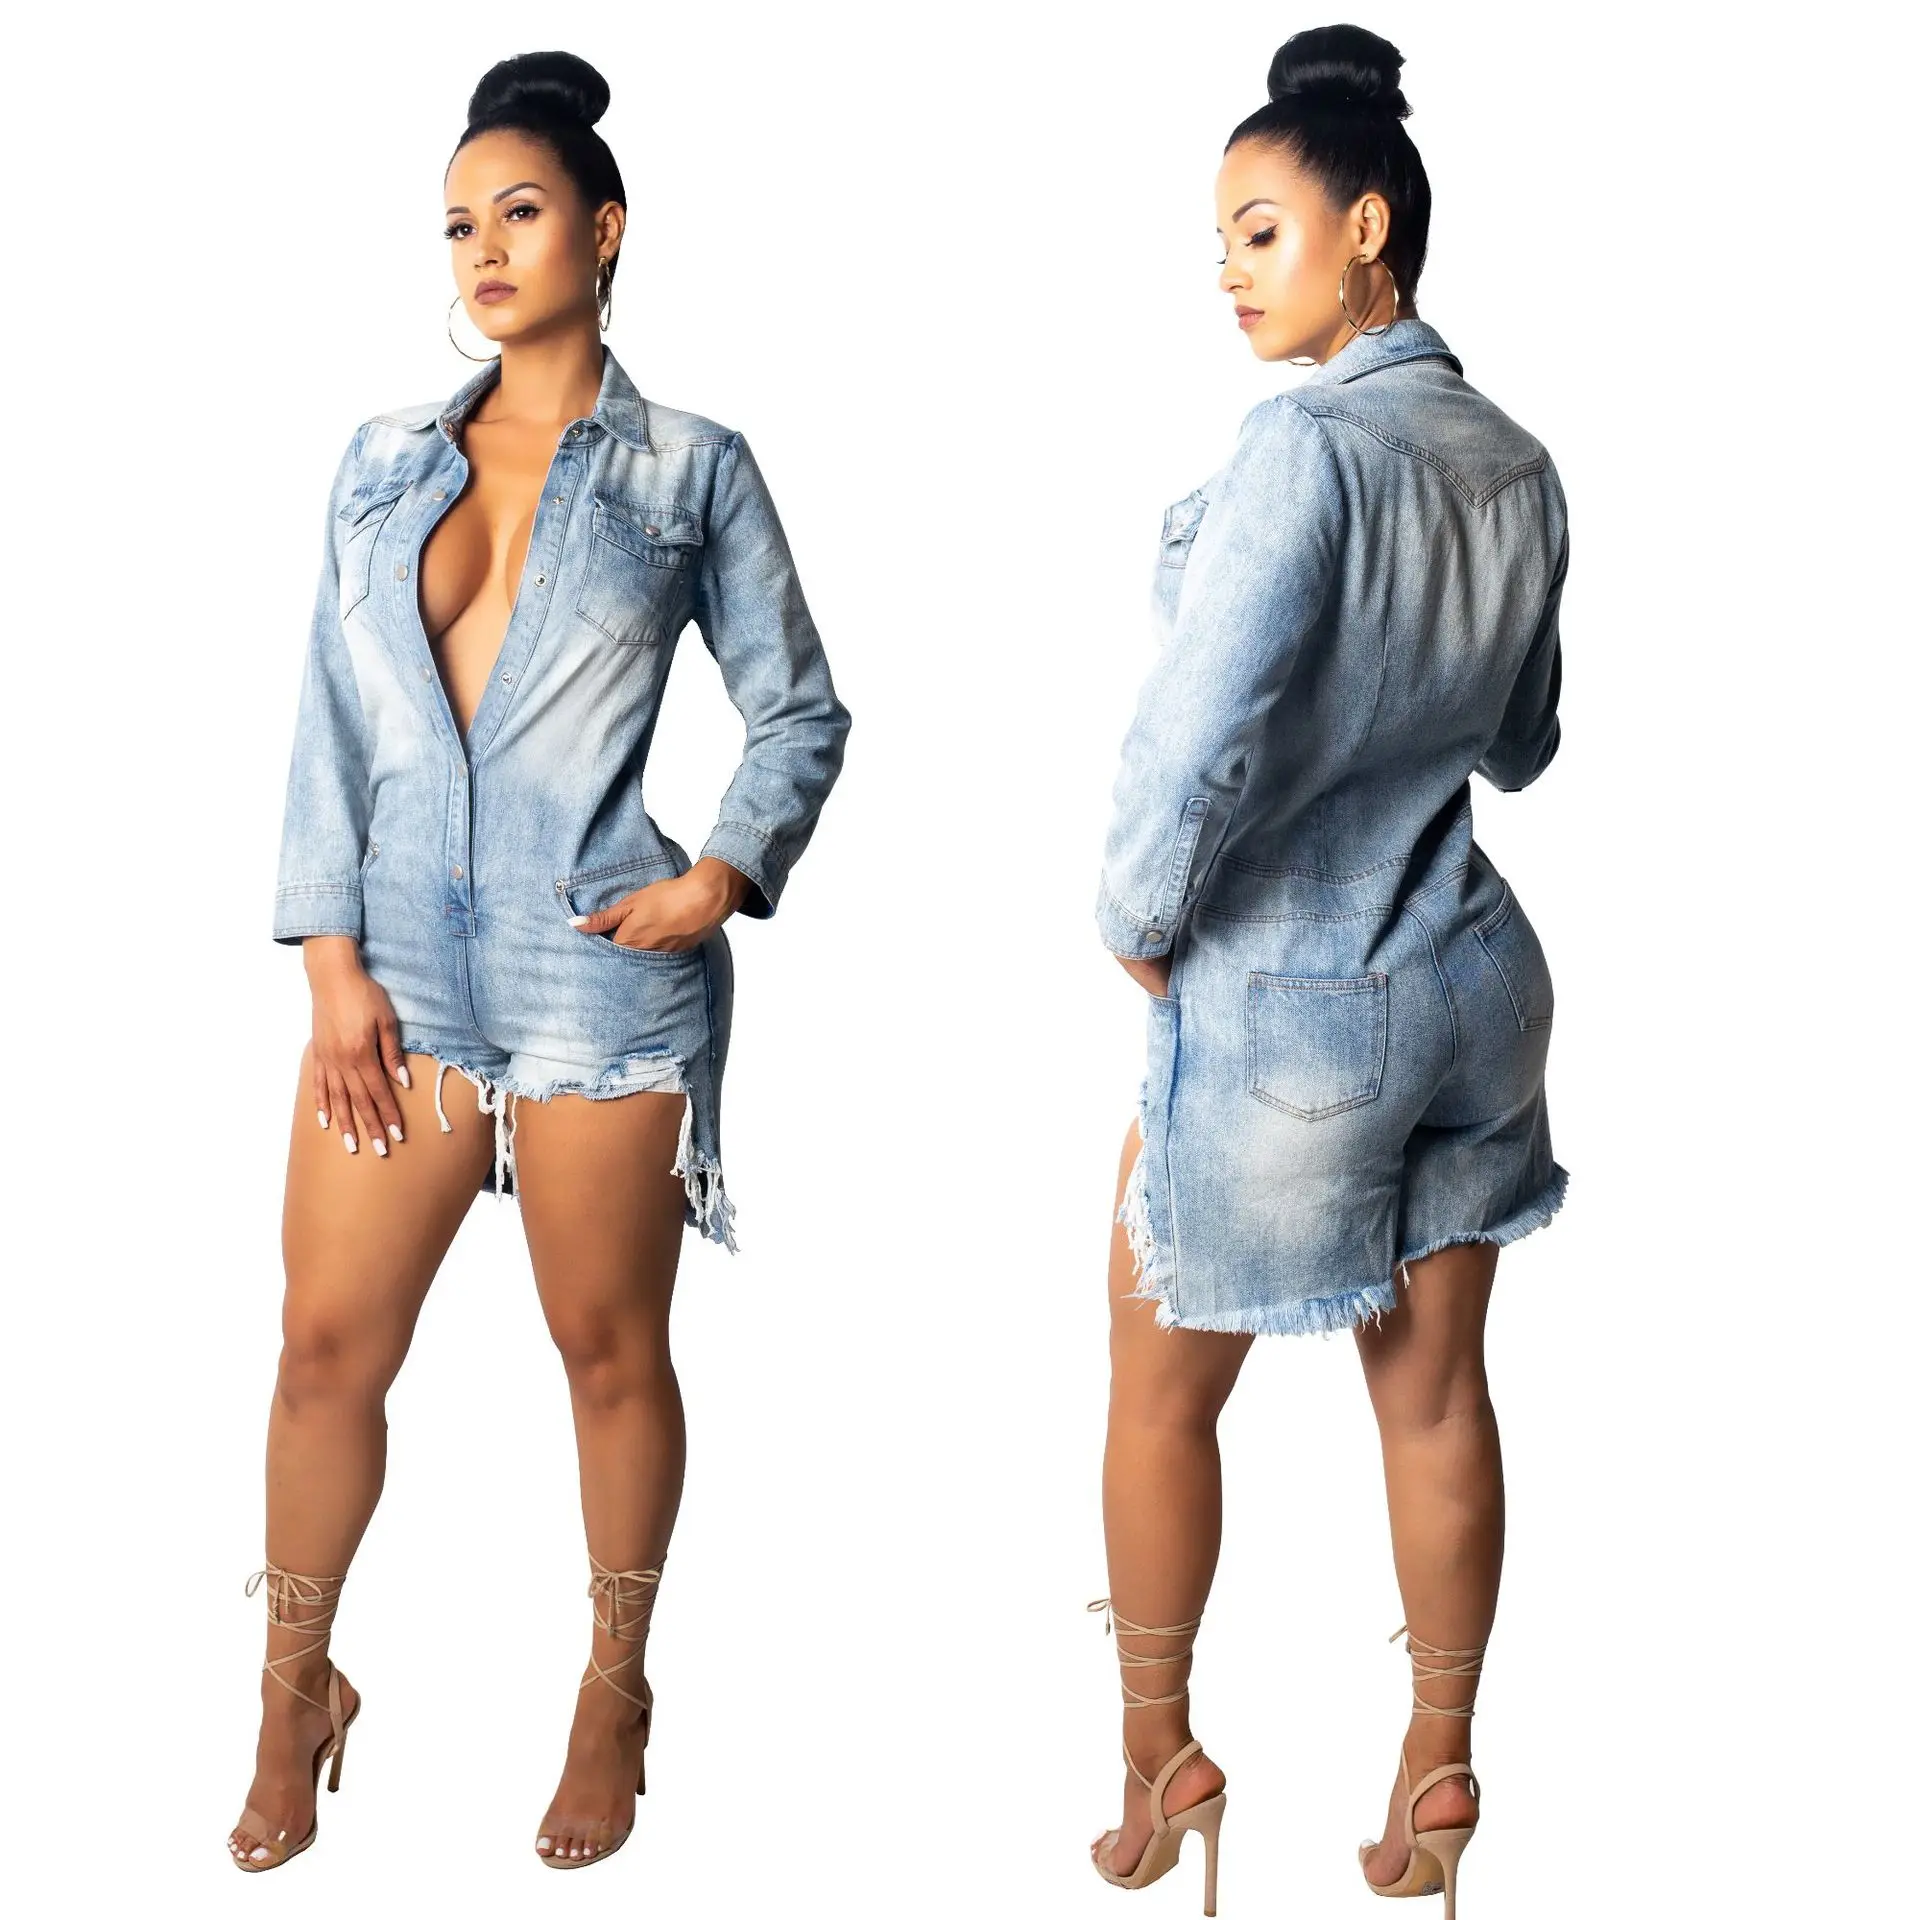 

Wholesale fashion ripped jeans jumpsuits faded glory jeans women short jeans jumpsuits, Picture colors;or custom color